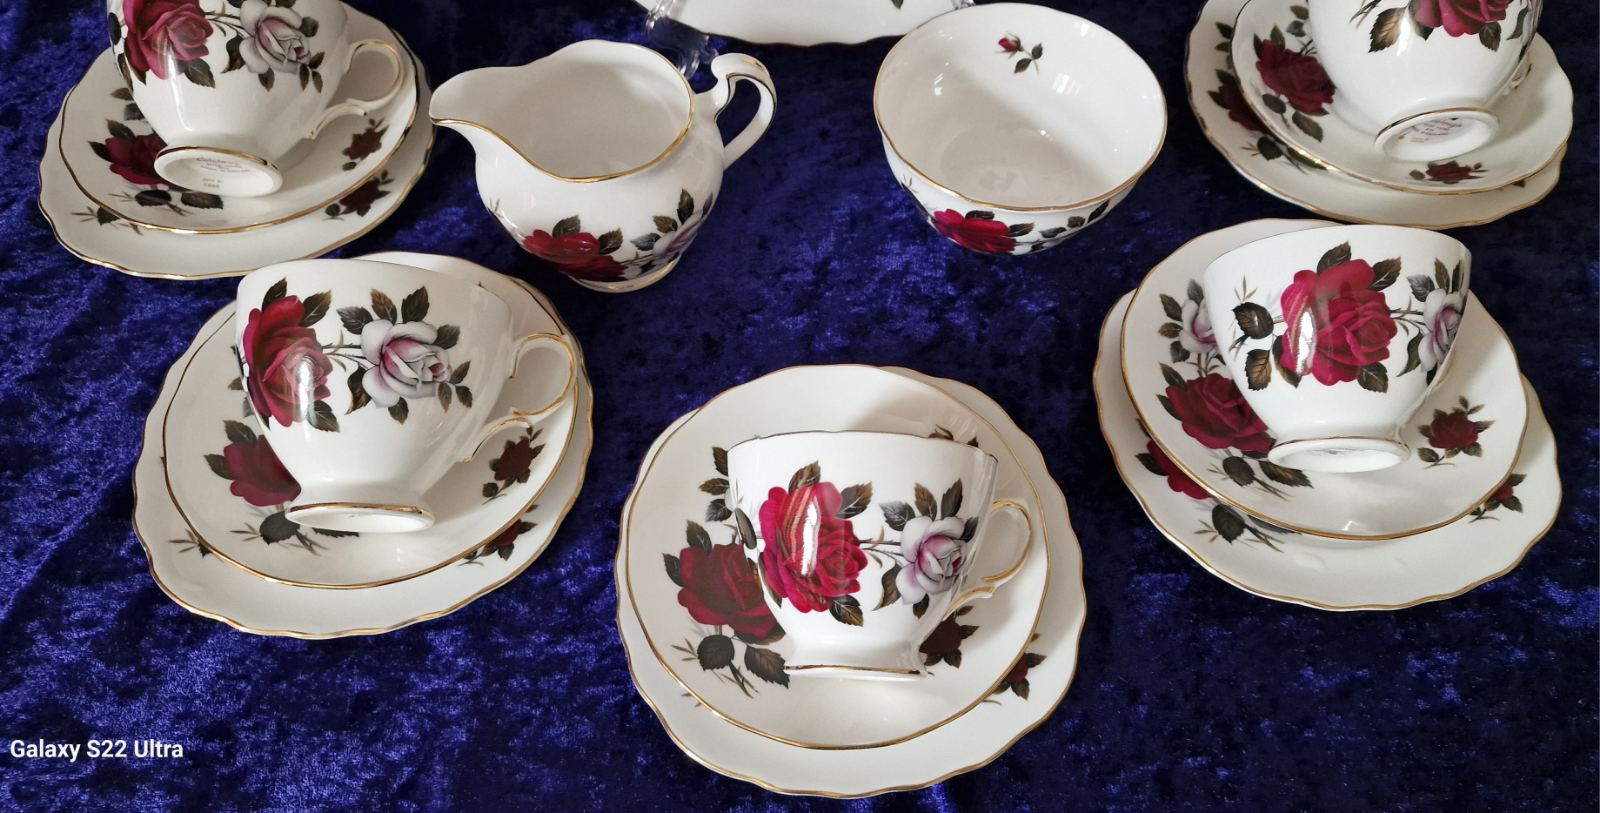 Colclough "Amoretta Rose" tea set featuring 5 cups and saucers adorned with roses.